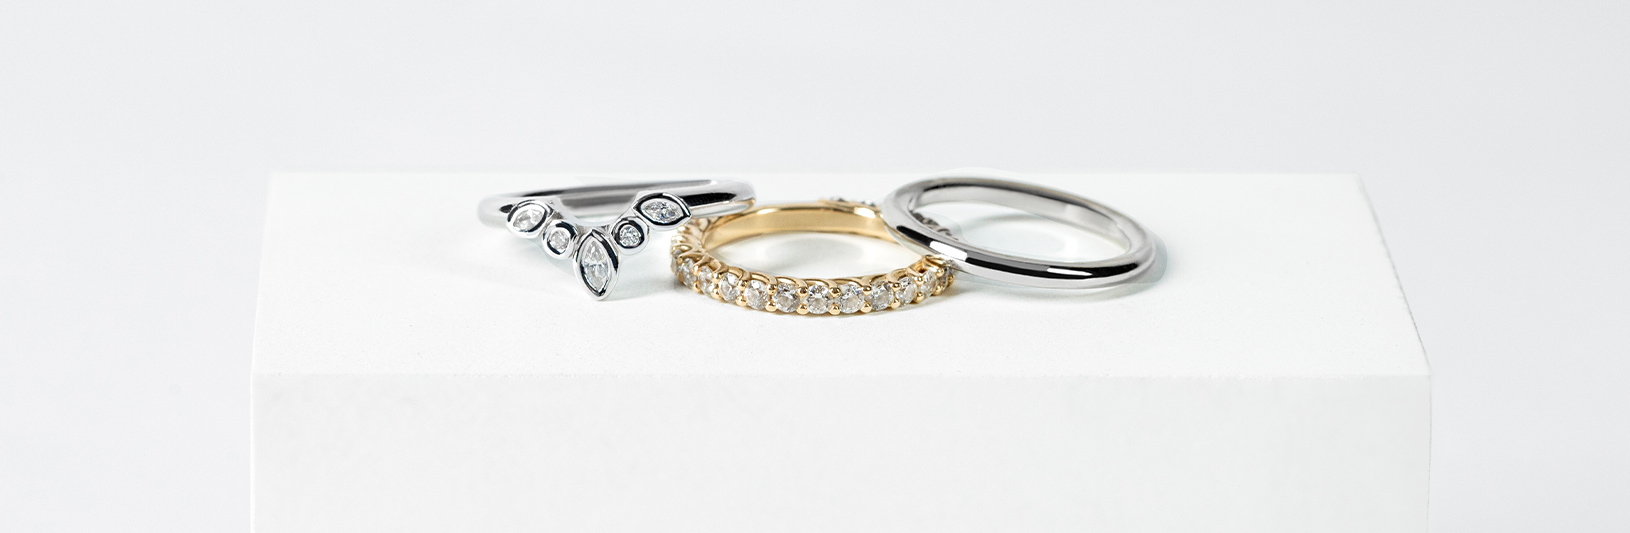 Stackable rings and wedding bands compared side by side